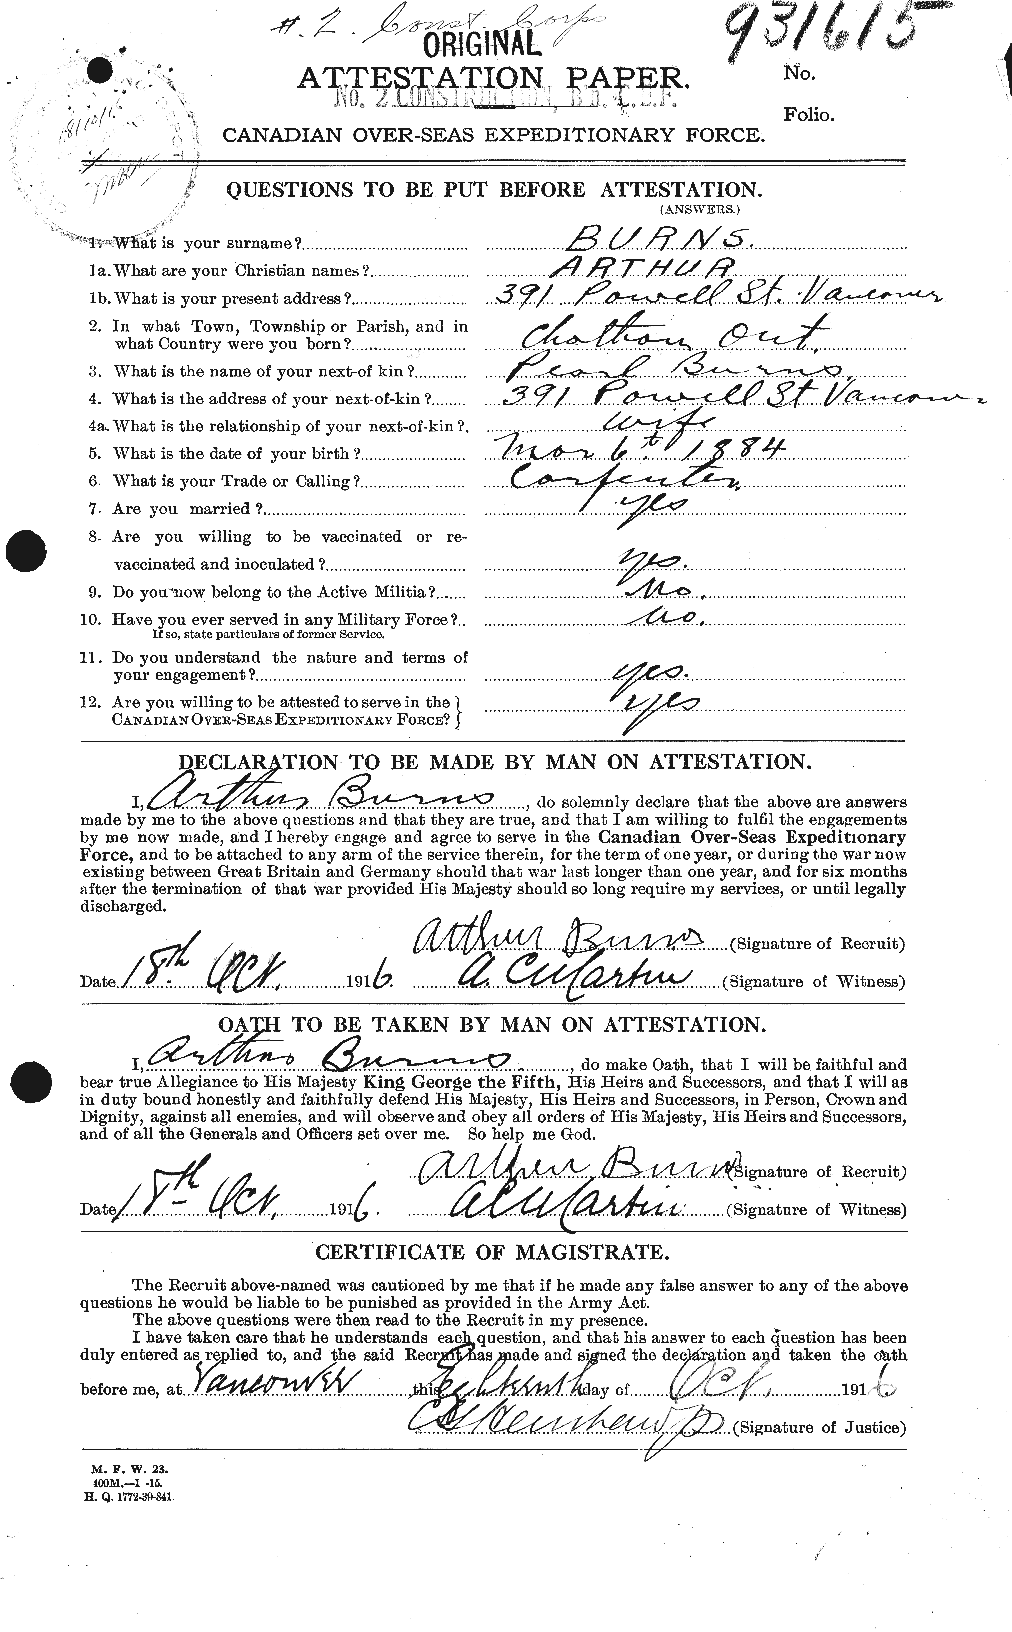 Personnel Records of the First World War - CEF 273777a